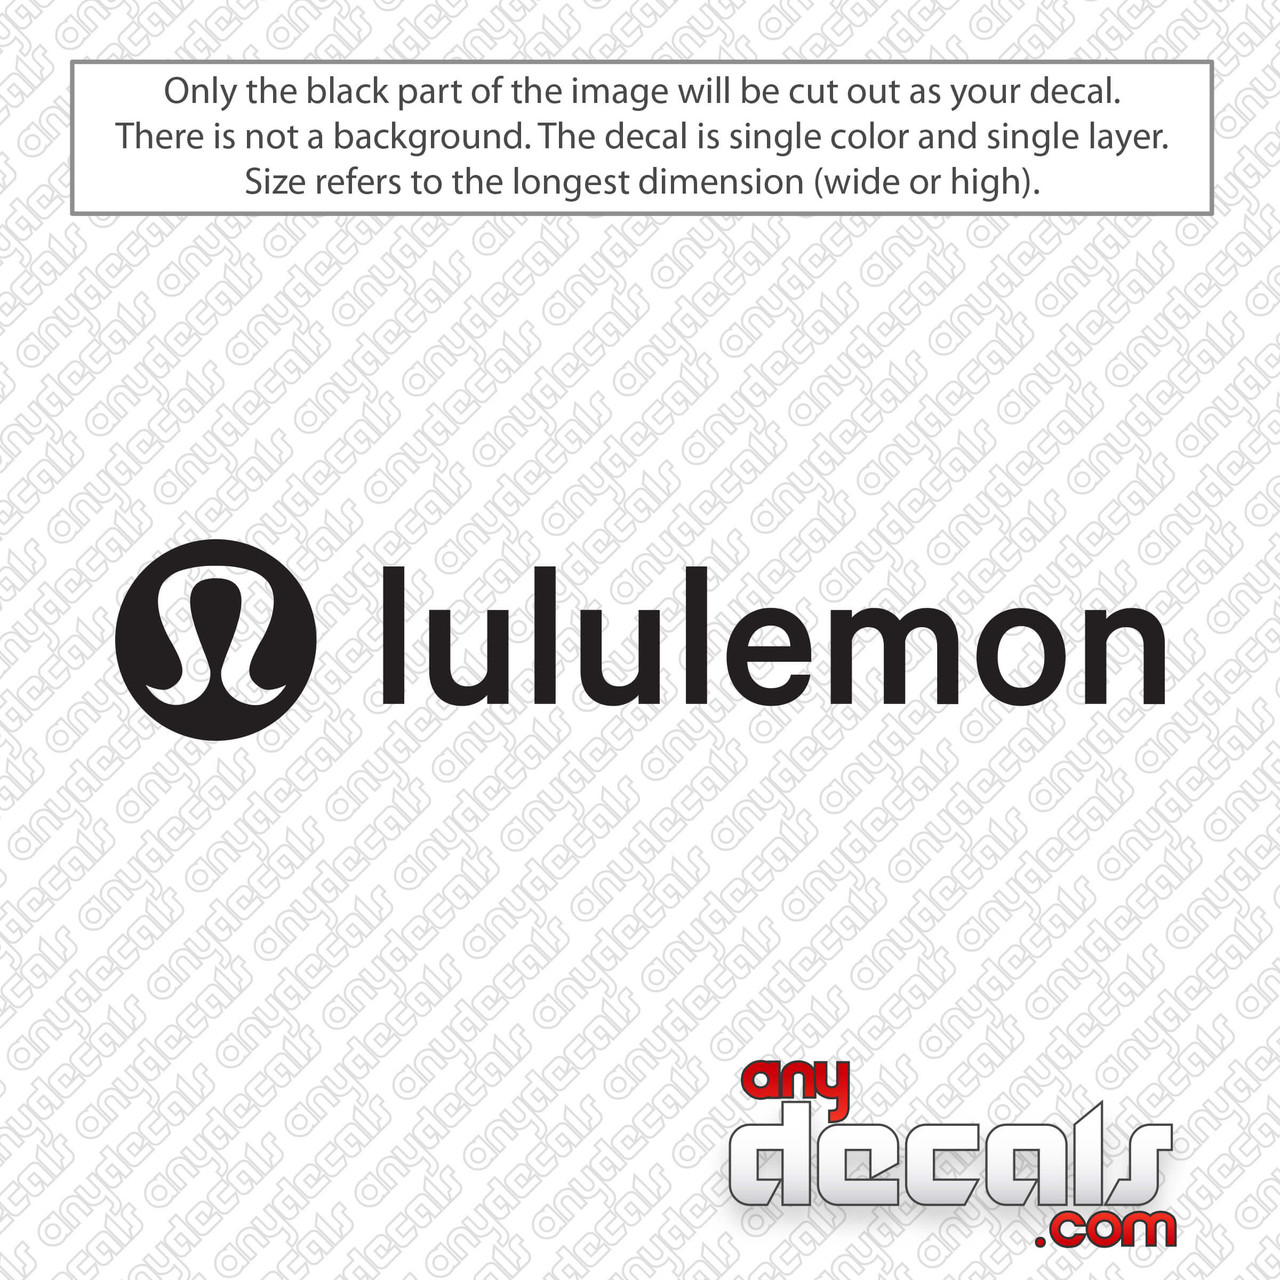 Lululemon Logo with Text Decal Sticker